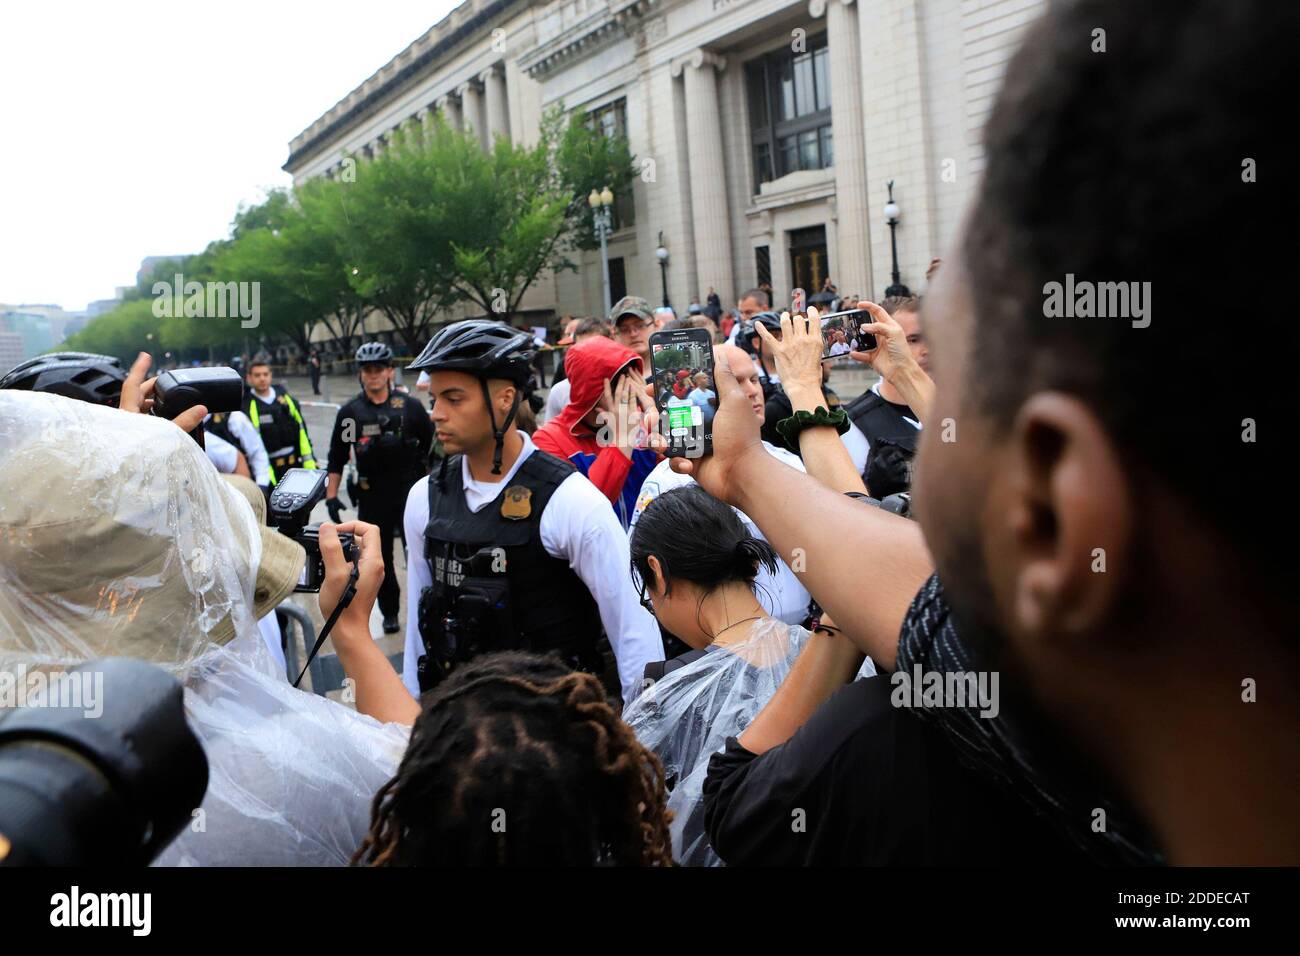 NO FILM, NO VIDEO, NO TV, NO DOCUMENTARY - A group of people are taken into a police barricade and cover their faces after being seen carrying a flag associated with white supremacists in front of the White House and chased by protestors on Sunday, August 12, 2018. Photo by Darryl Smith/TNS/ABACAPRESS.COM Stock Photo